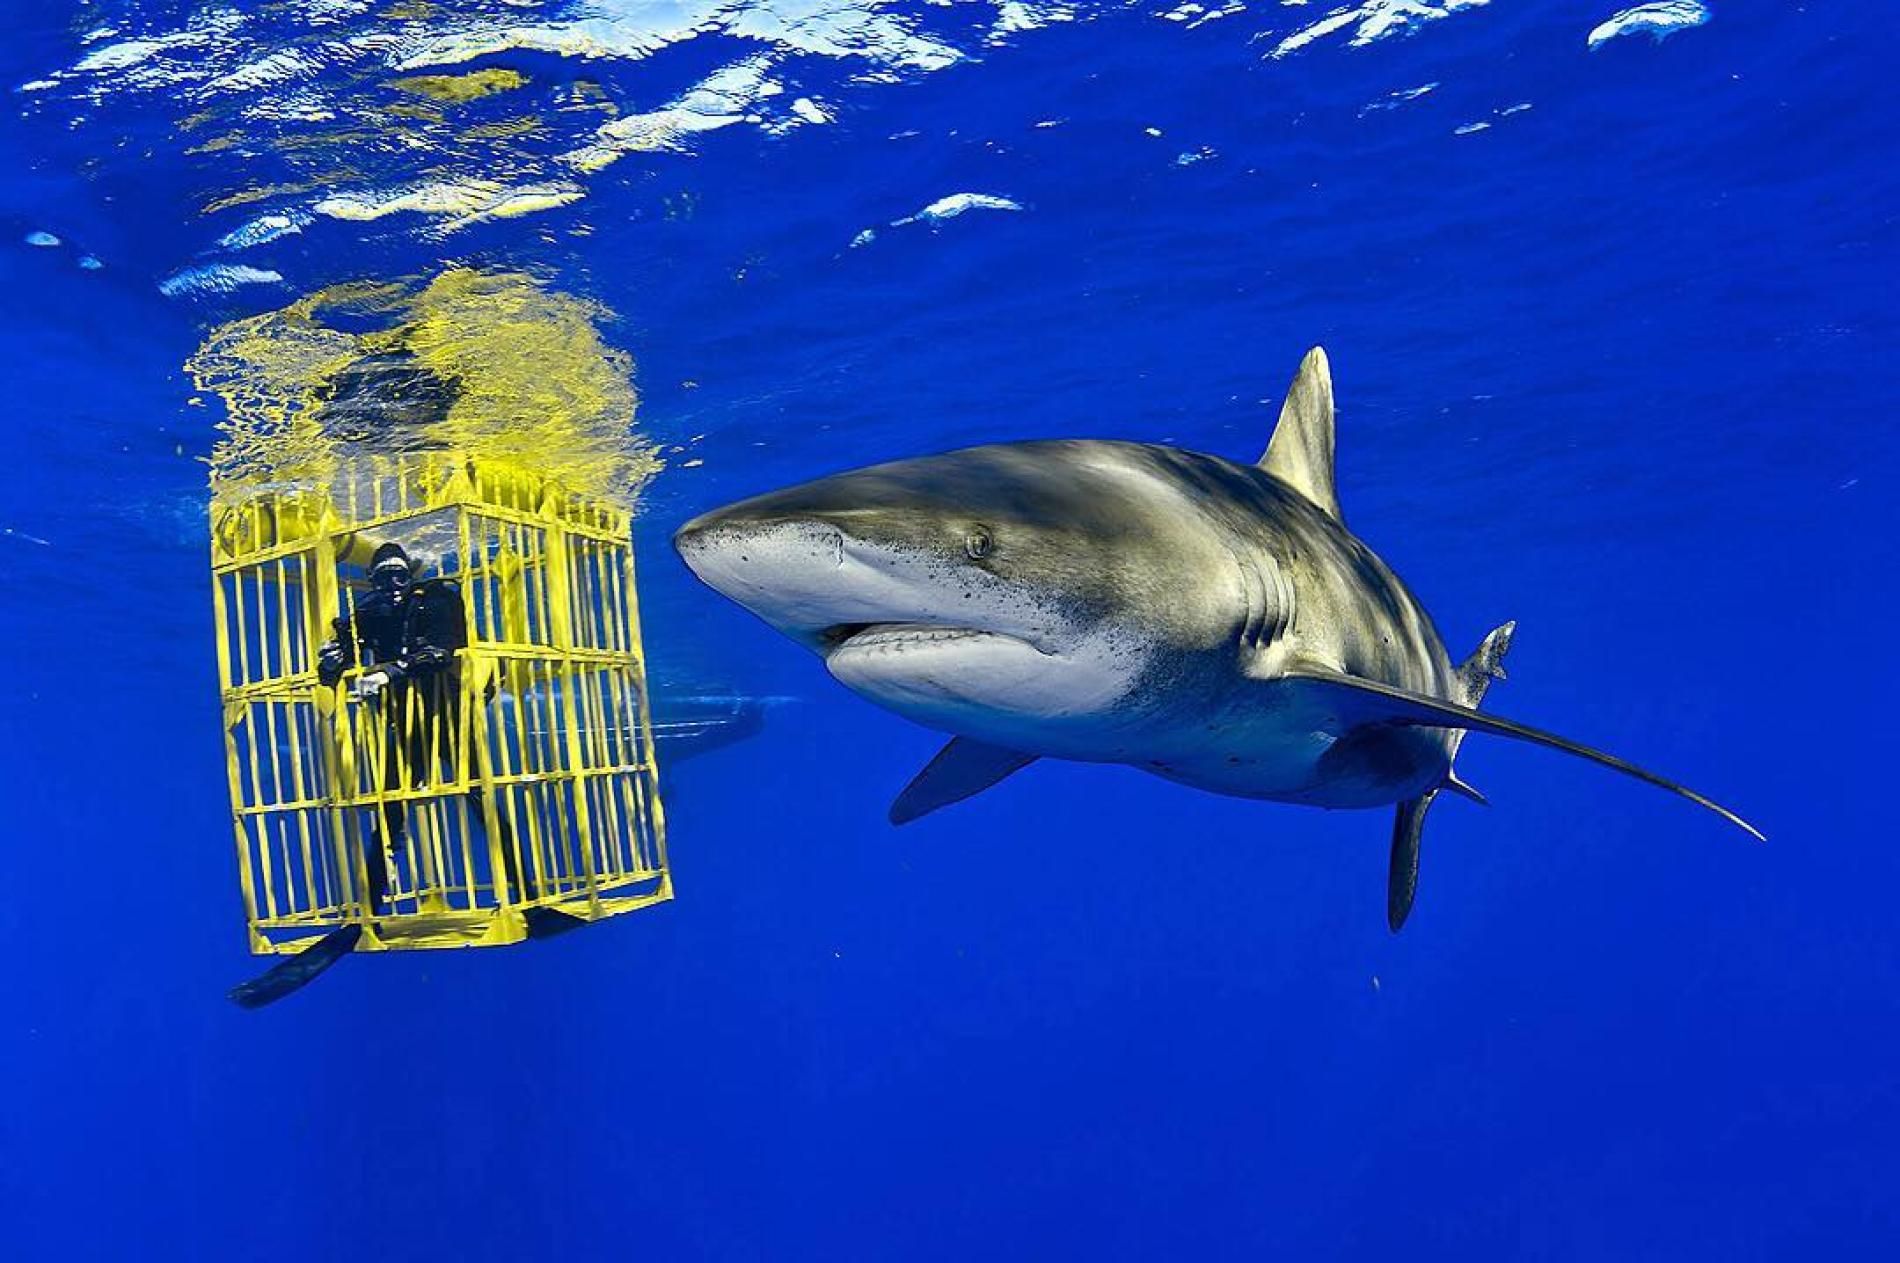 20 BehindTheScenes Details About Discoverys Shark Week